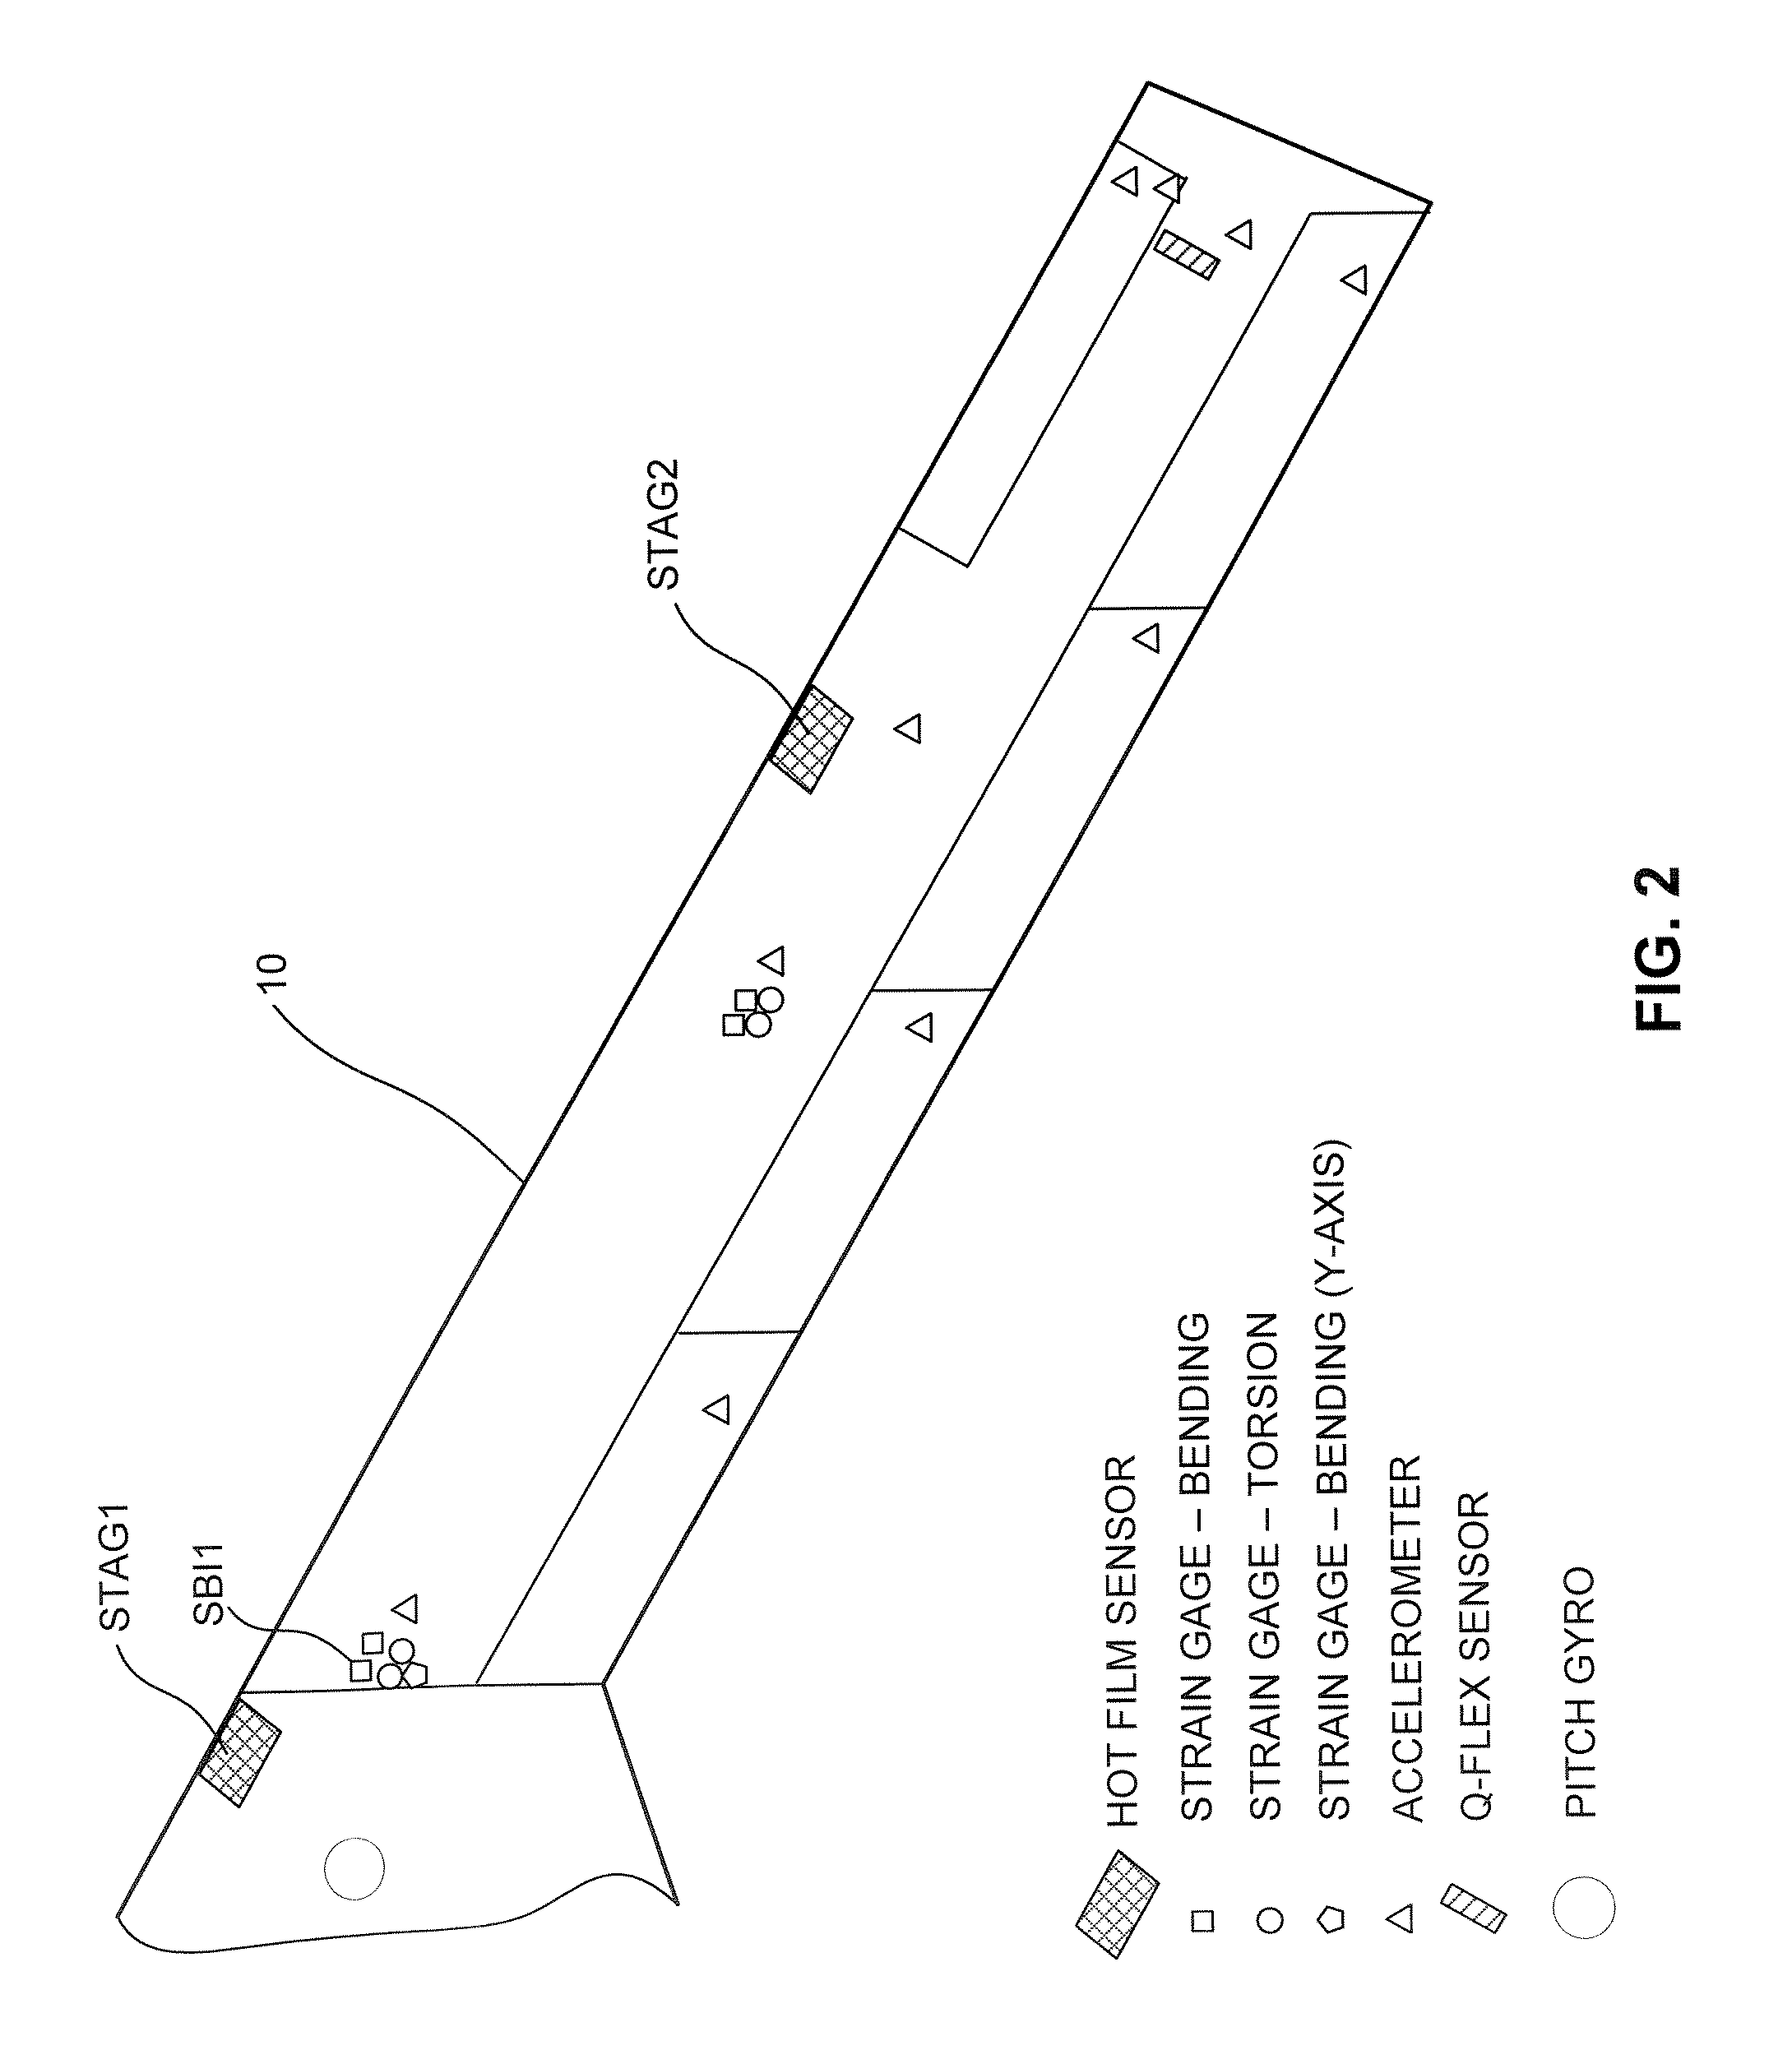 System and Method for Control of Aeroelasticity Effects